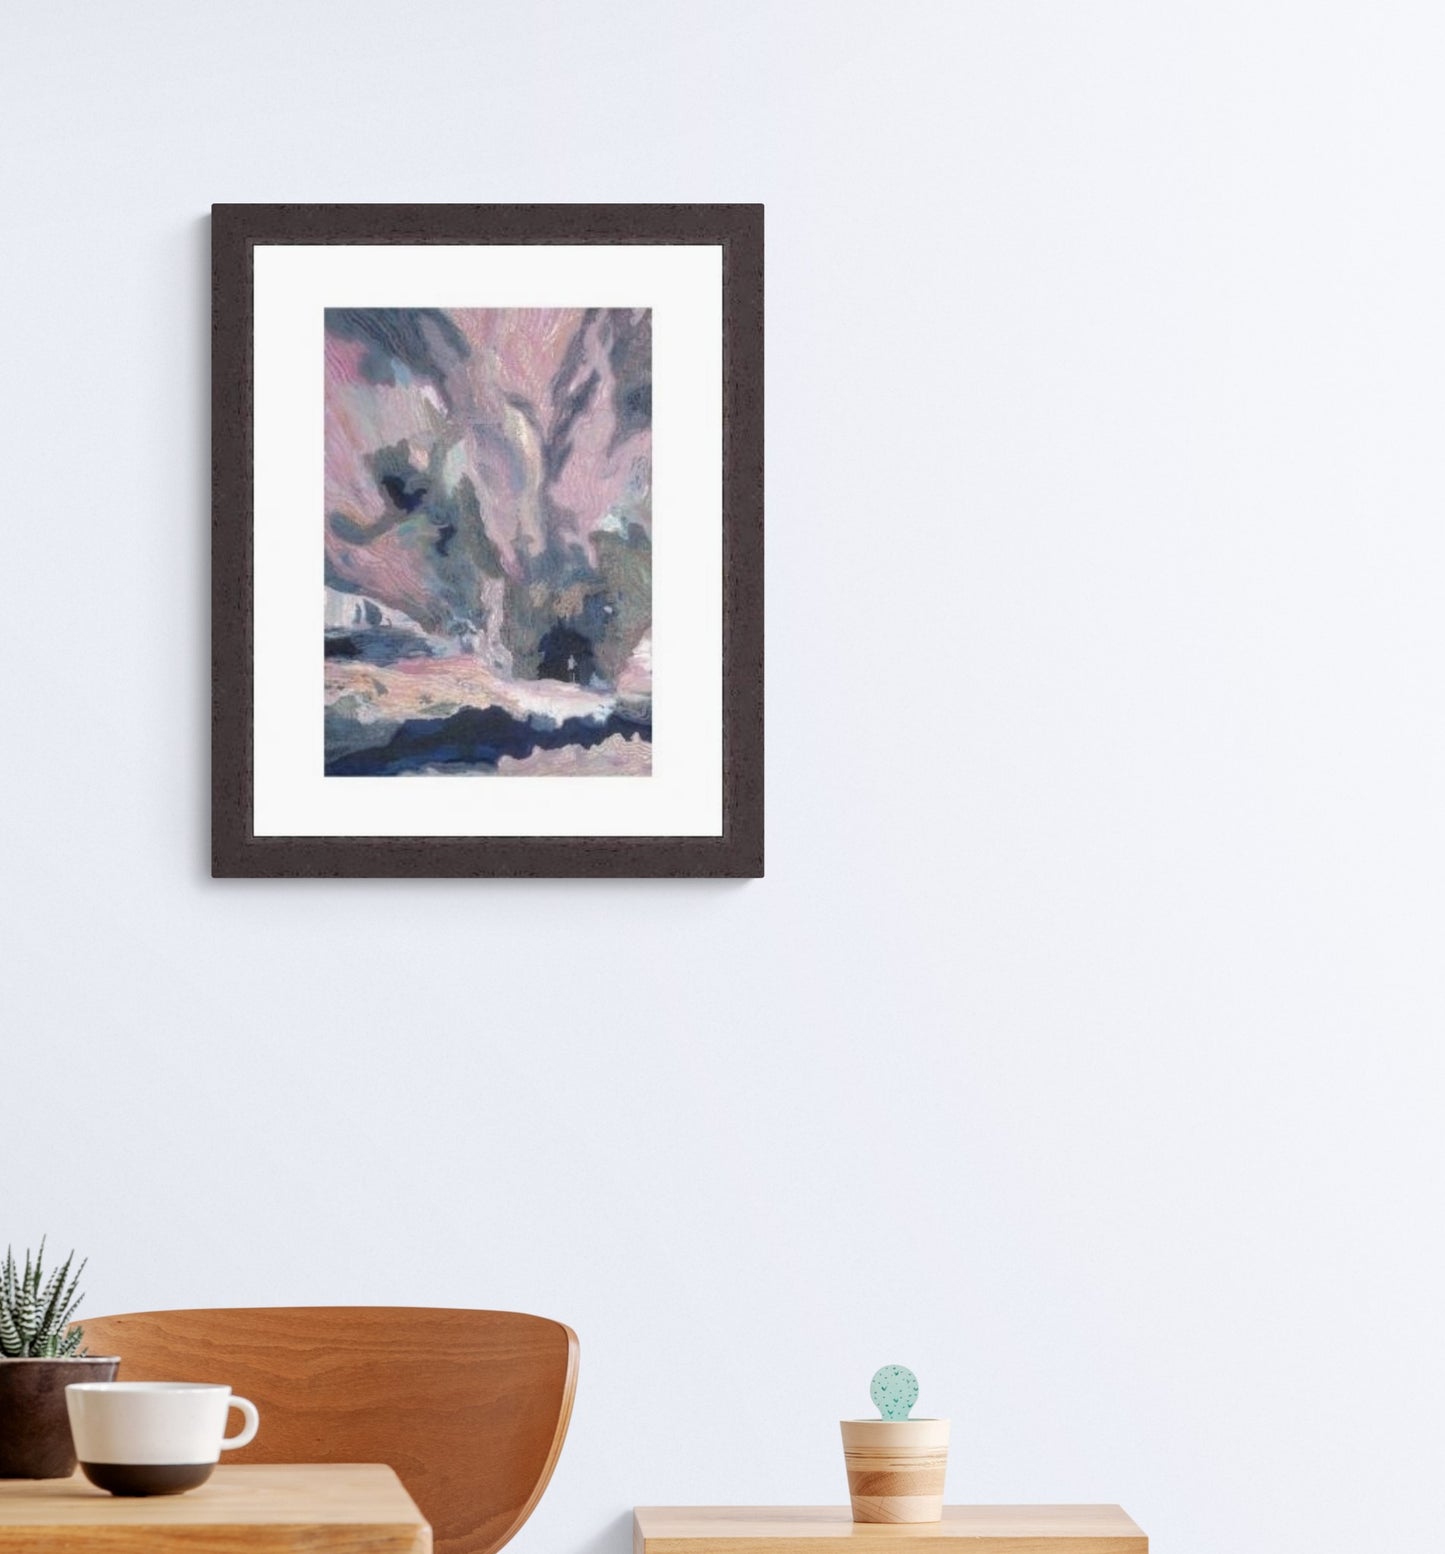 Boy in a Cave Framed Limited Edition Giclée Print